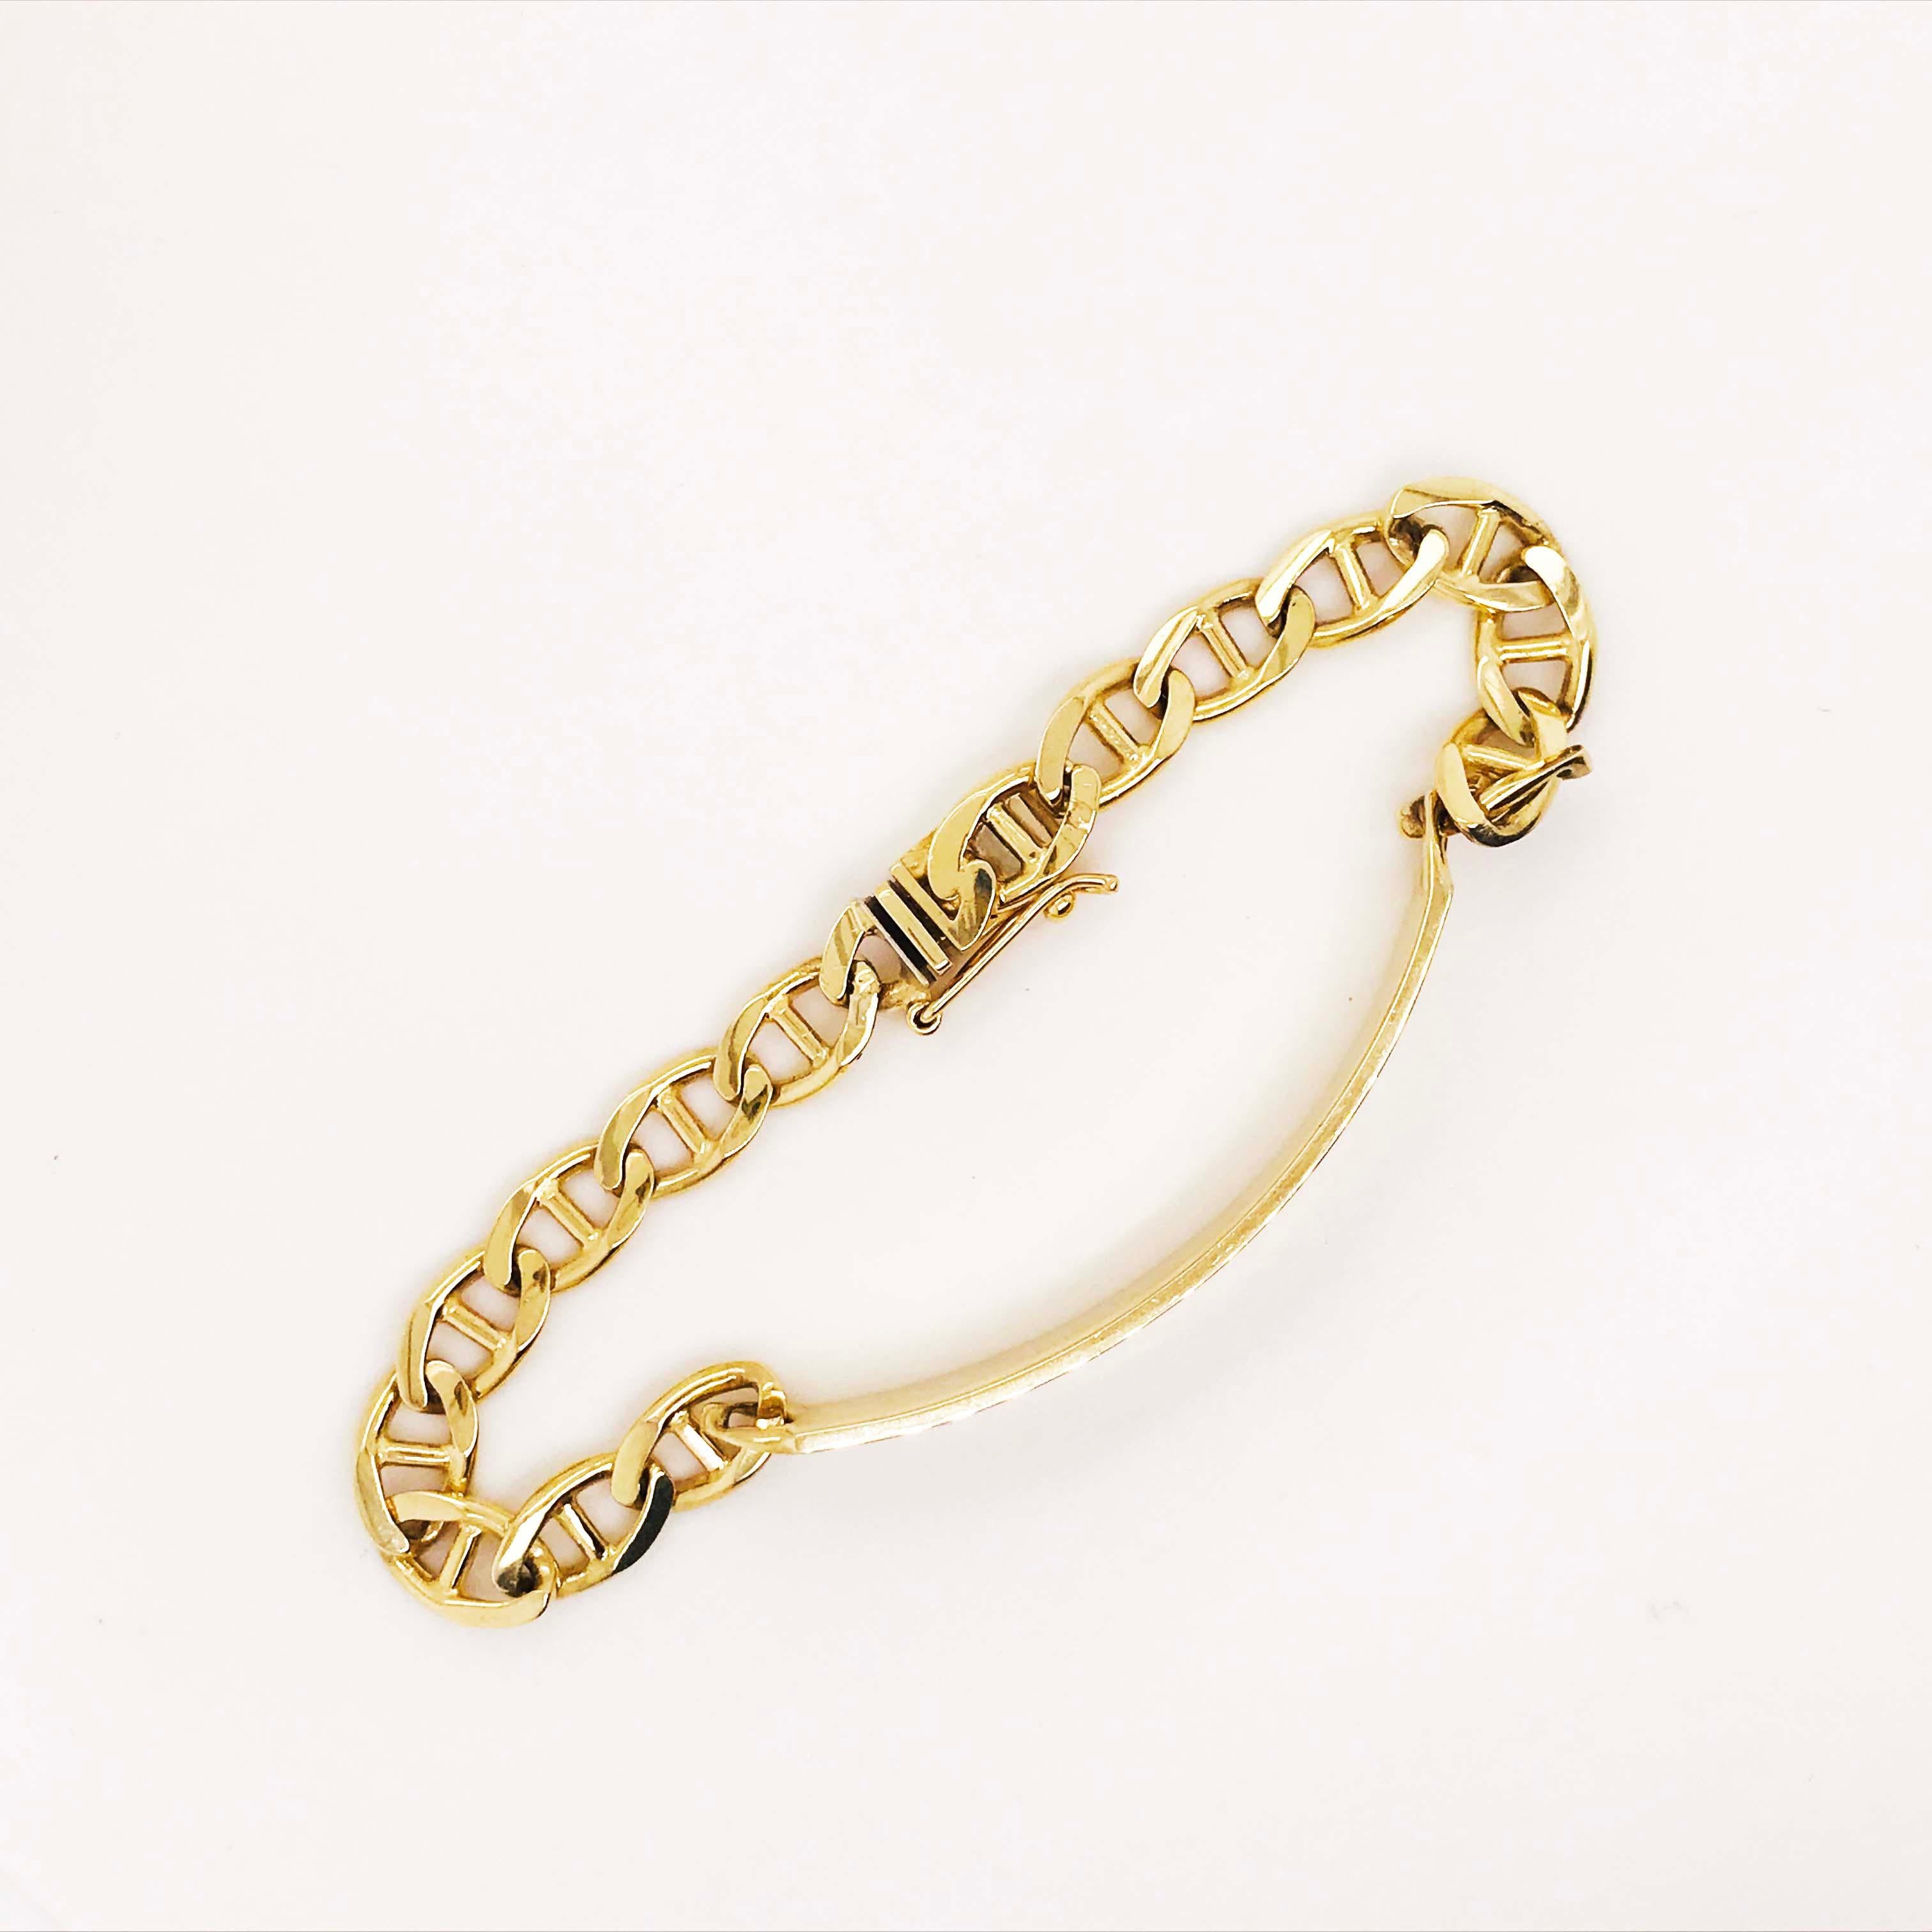 Engravable ID Bracelet in 14 kt Gold with Anchor Link Chain for Men or LG Woman 6